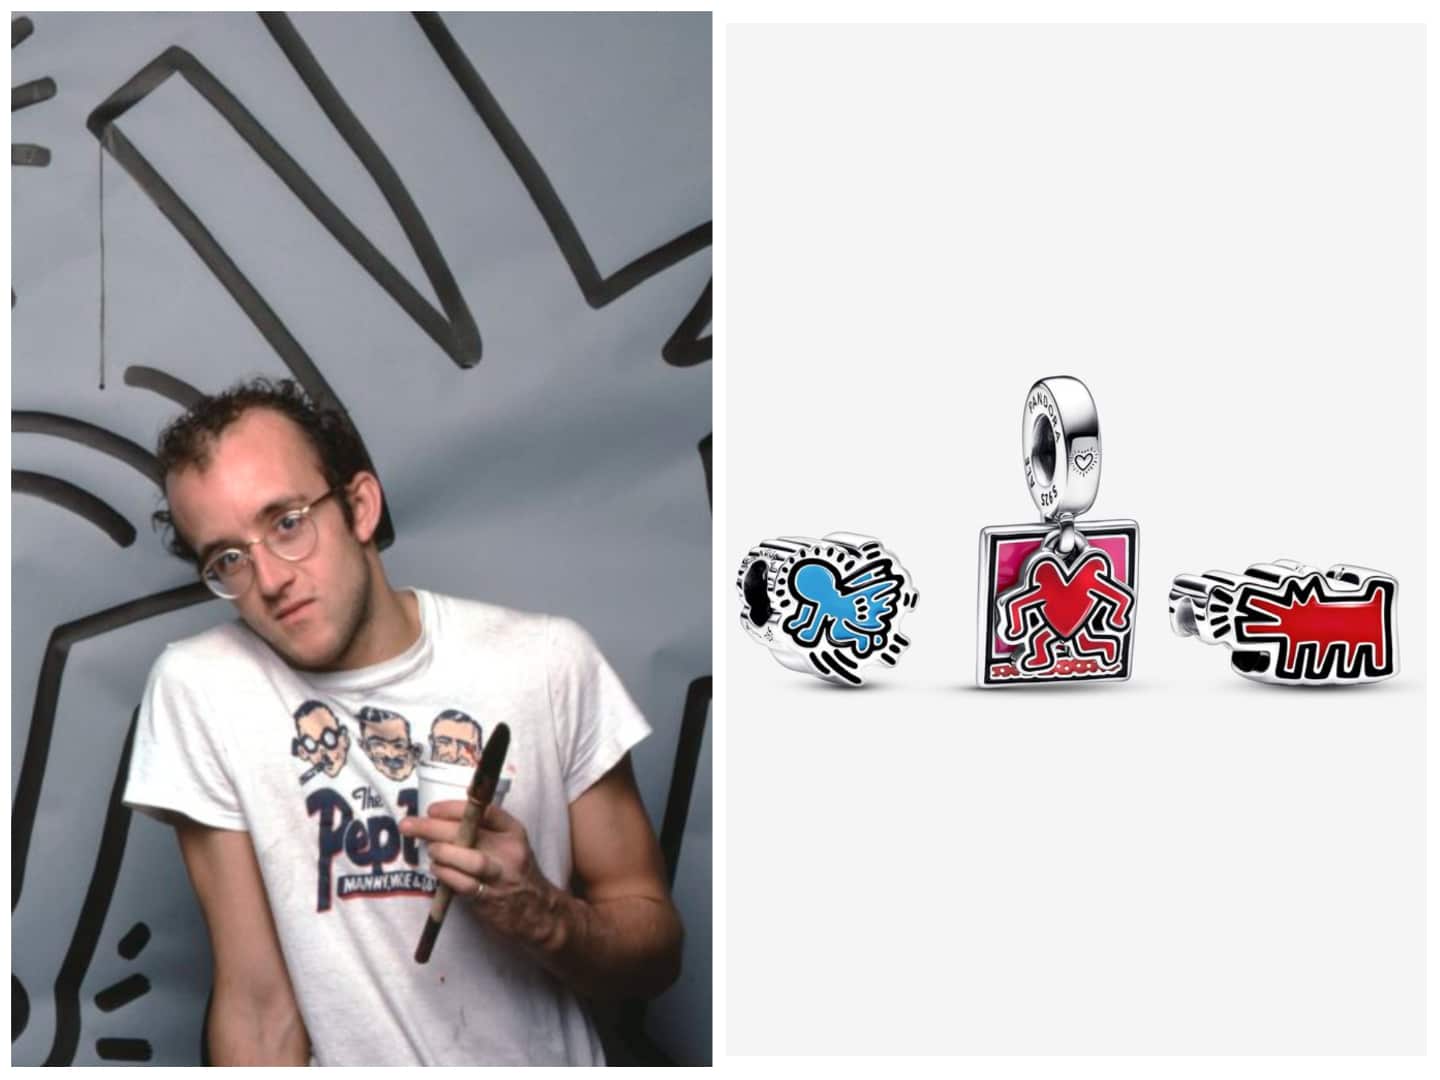 Pandora releases a collection inspired by Keith Haring’s iconic artwork – but fans aren’t happy